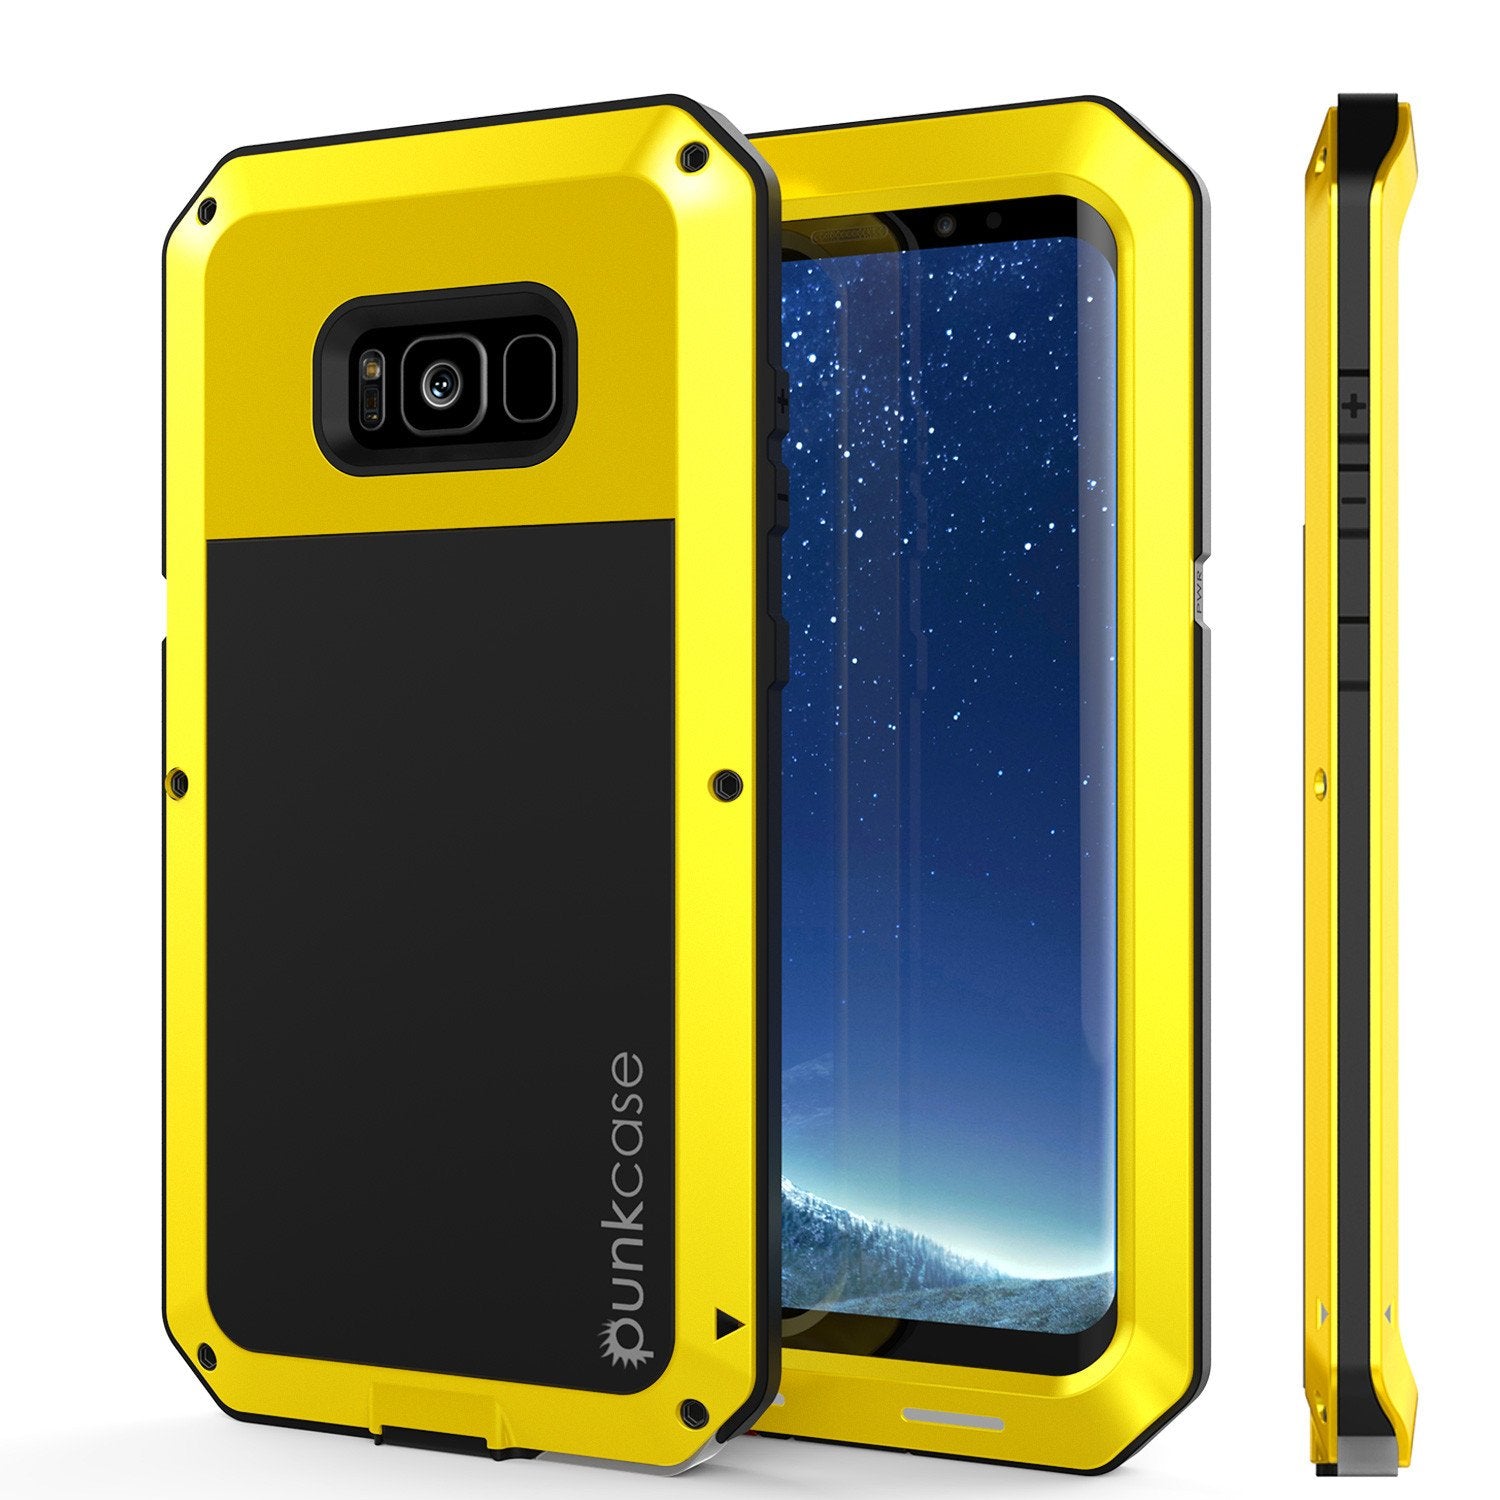 Galaxy S8 Metal Case, Heavy Duty Military Grade Rugged Armor Cover [shock proof] W/ Prime Drop Protection [NEON]